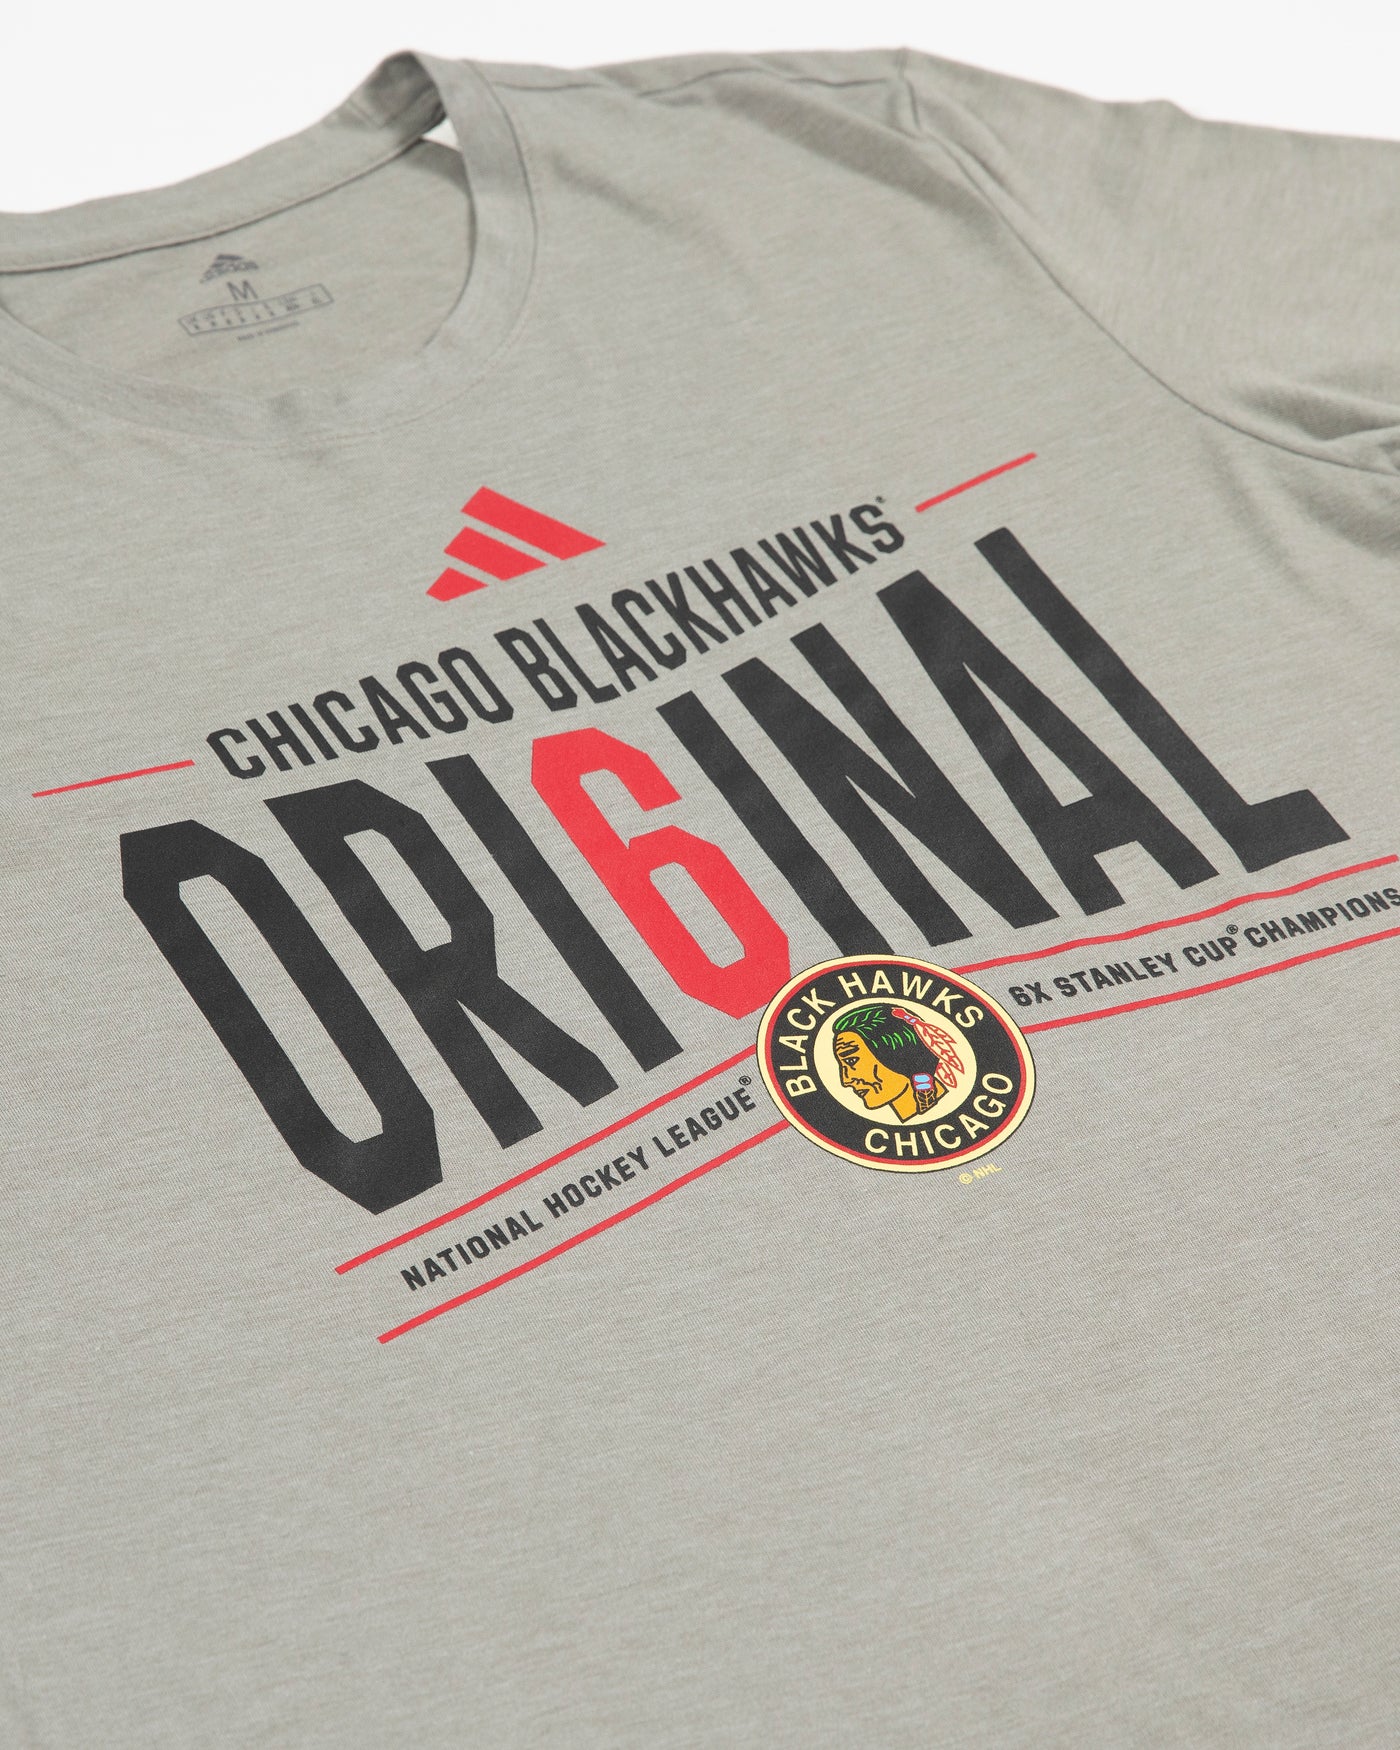 grey adidas t-shirt with vintage Chicago Blackhawks primary logo and Original 6 graphic across chest - detail lay flat